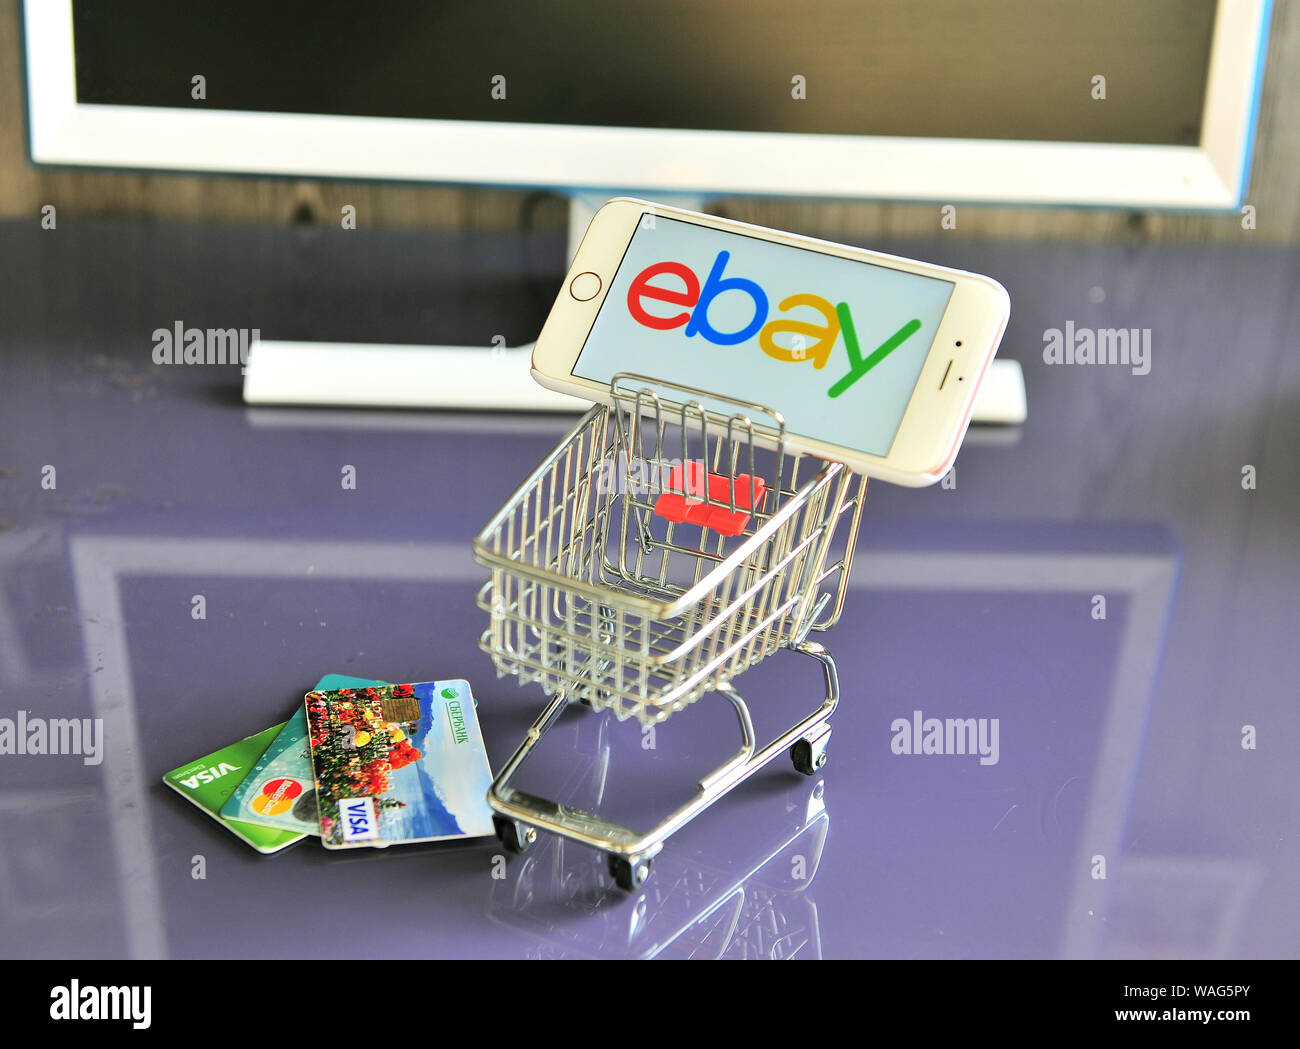 Yaroslavl, Russia - August 20, 2019: Mobile phone with ebay logo in shopping cart and credit cards on the table. Stock Photo